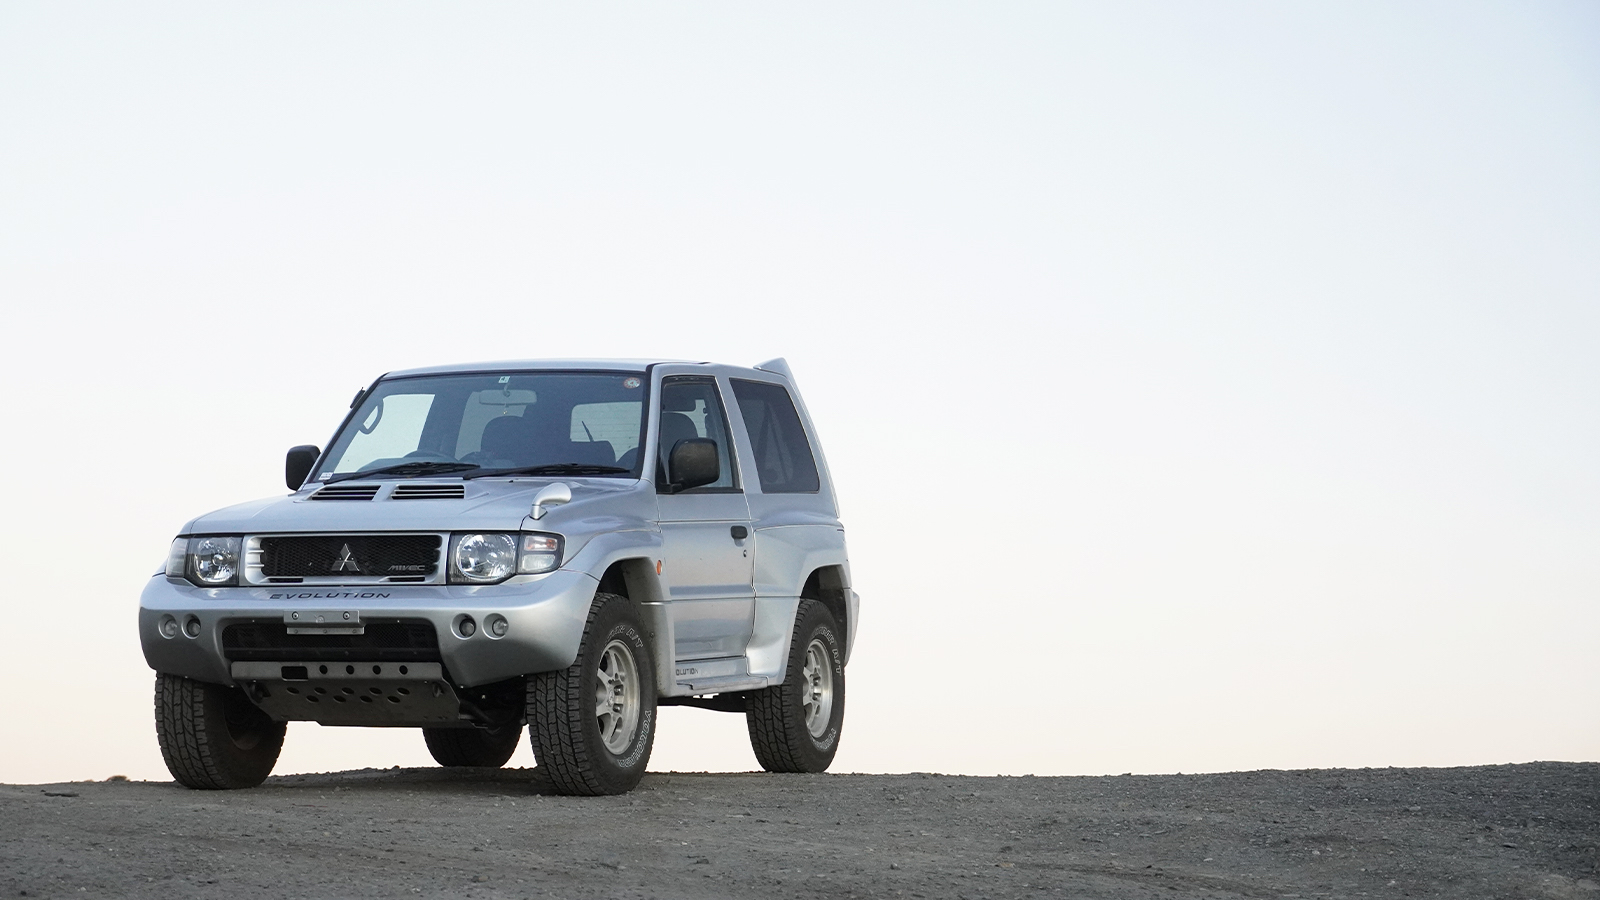 Lifted Mitsubishi Montero - One of the Most Underestimated SUV's